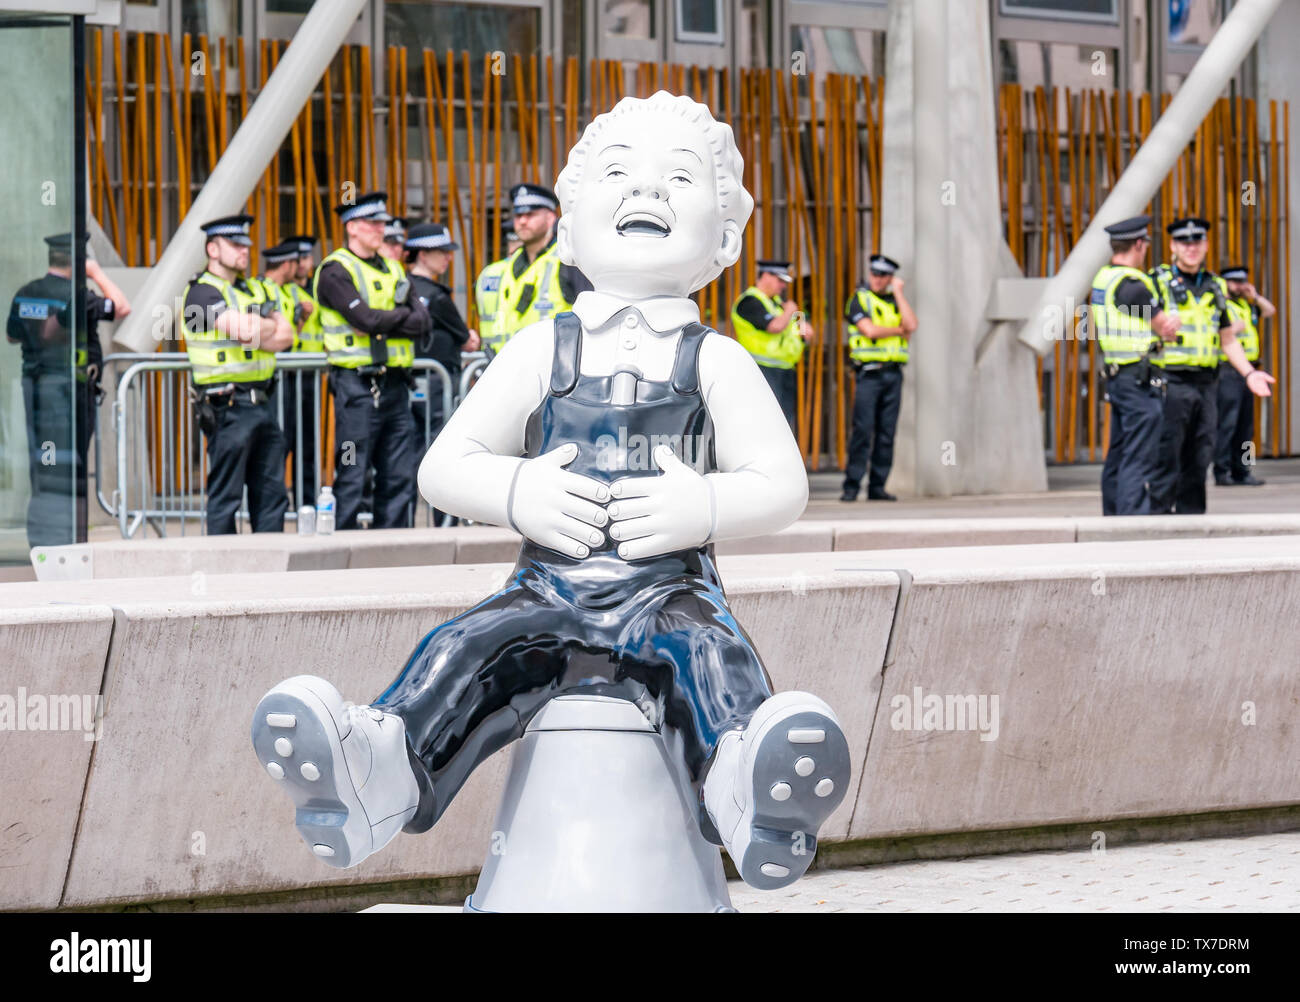 Oor Wullie Big Bucket Art Trail by Peter Davidson, Scottish Pariament during protest with police, Holyrood, Edinburgh, Scotland, UK Stock Photo